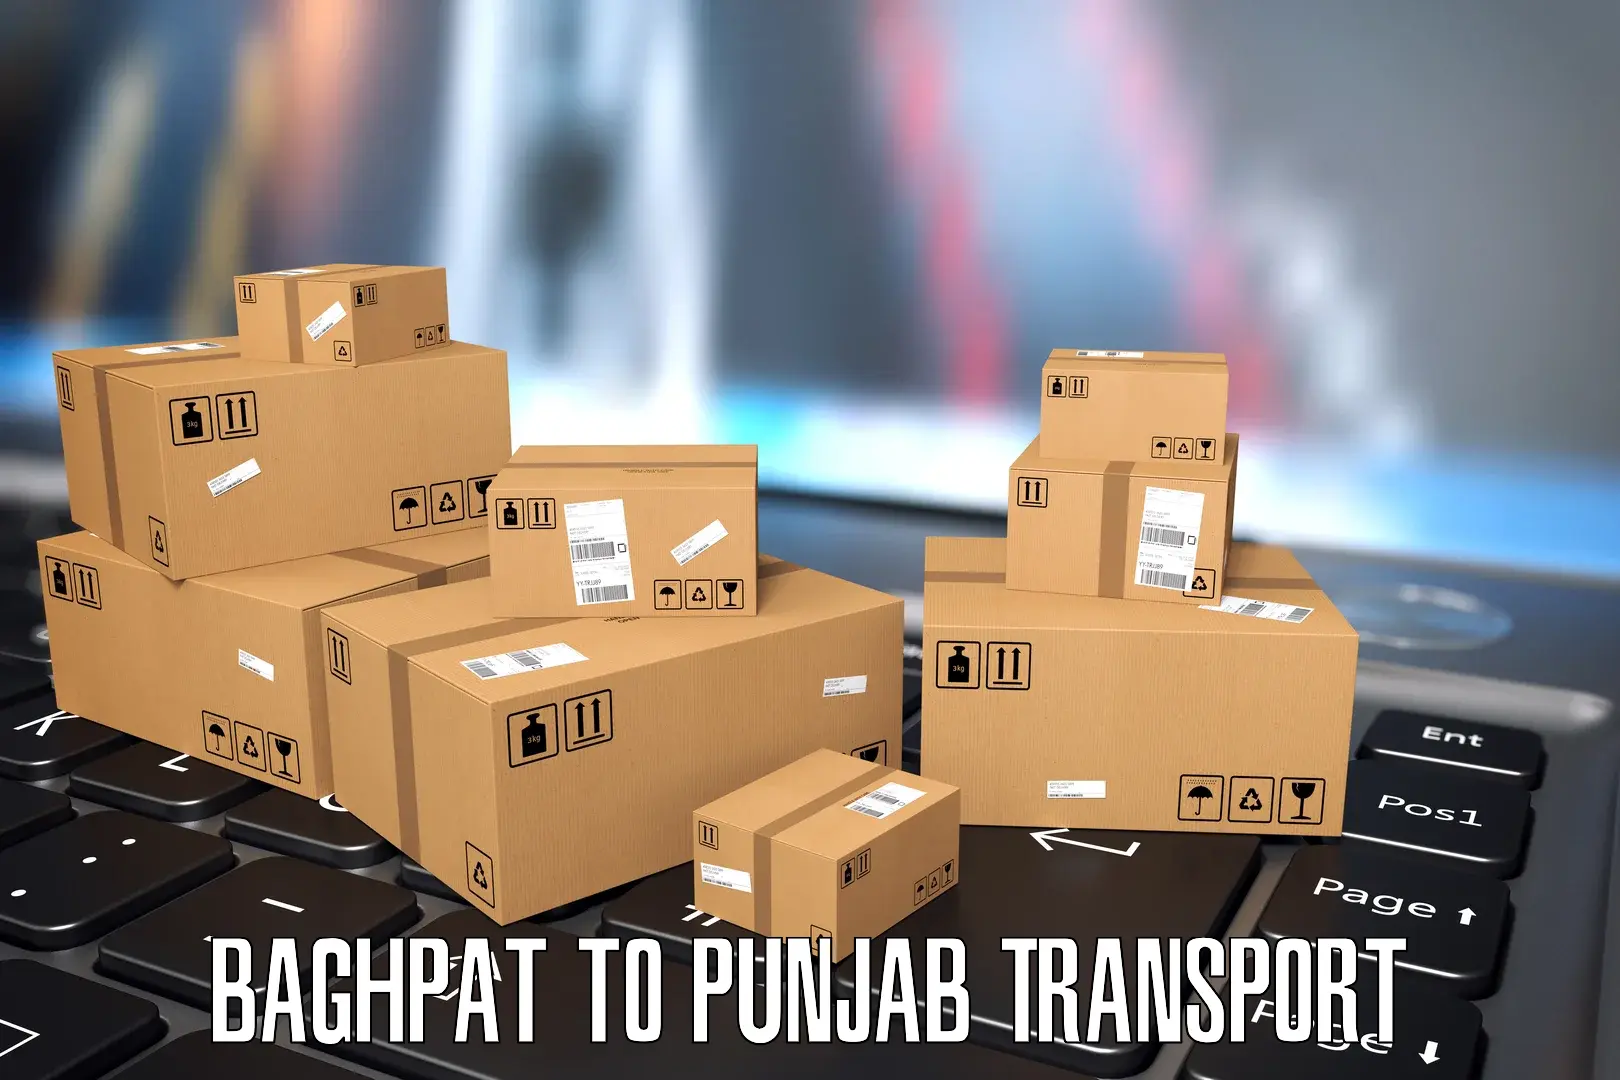 Pick up transport service Baghpat to Ludhiana